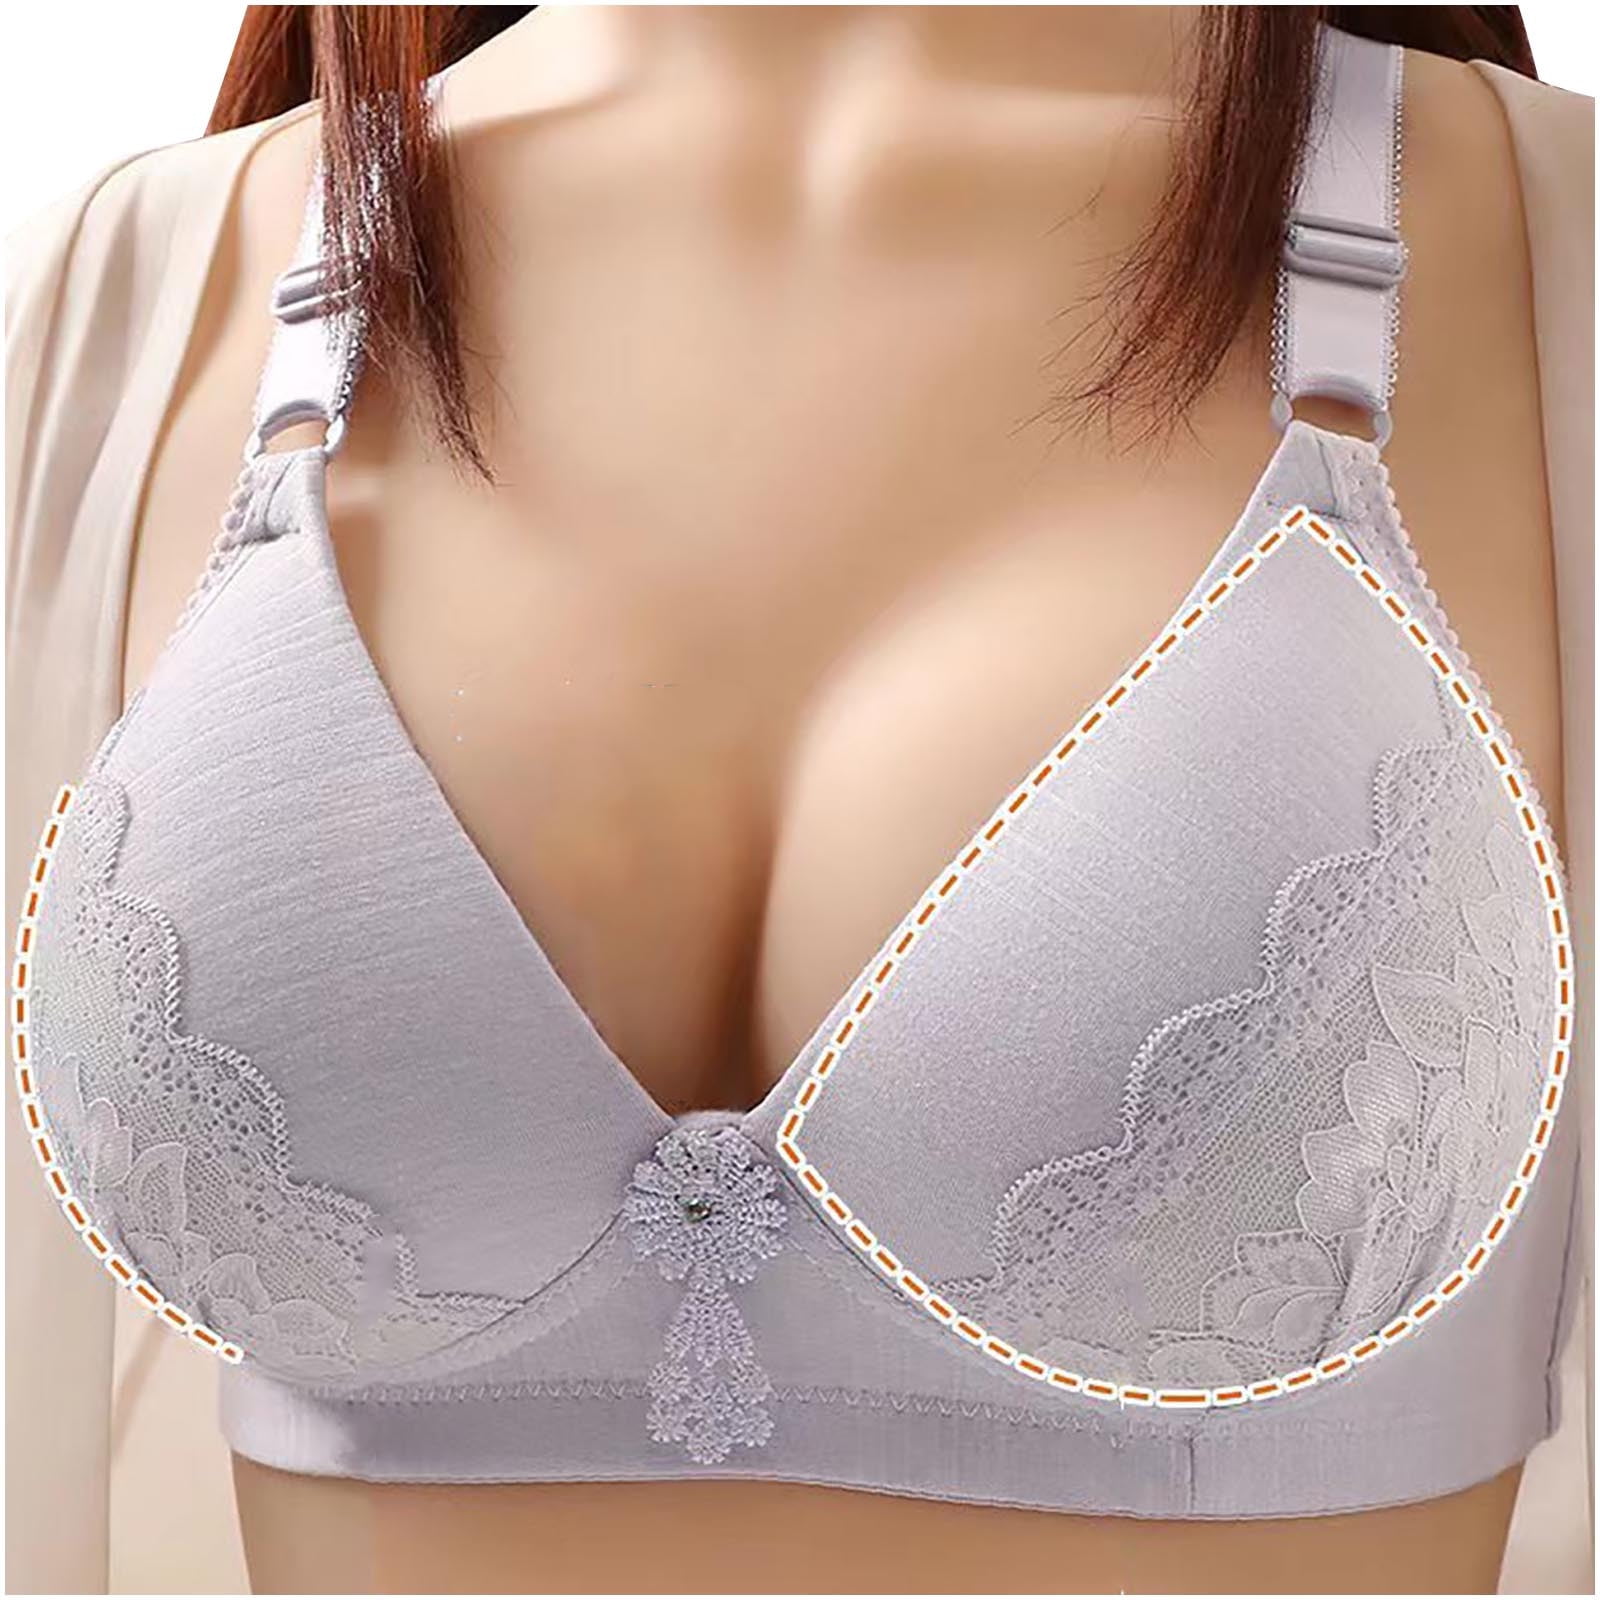 Lopecy-Sta Woman's Printing Gathered Together Large Size Daily Bra